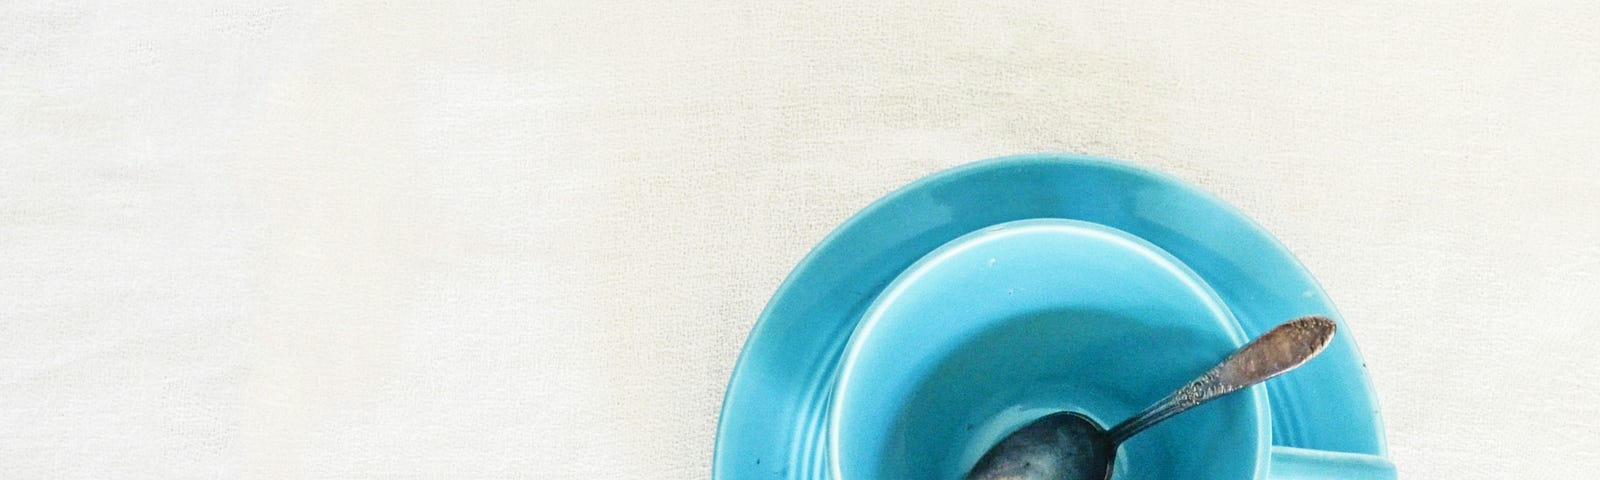 Blue tea cup on a blue saucer with a metal spoon.